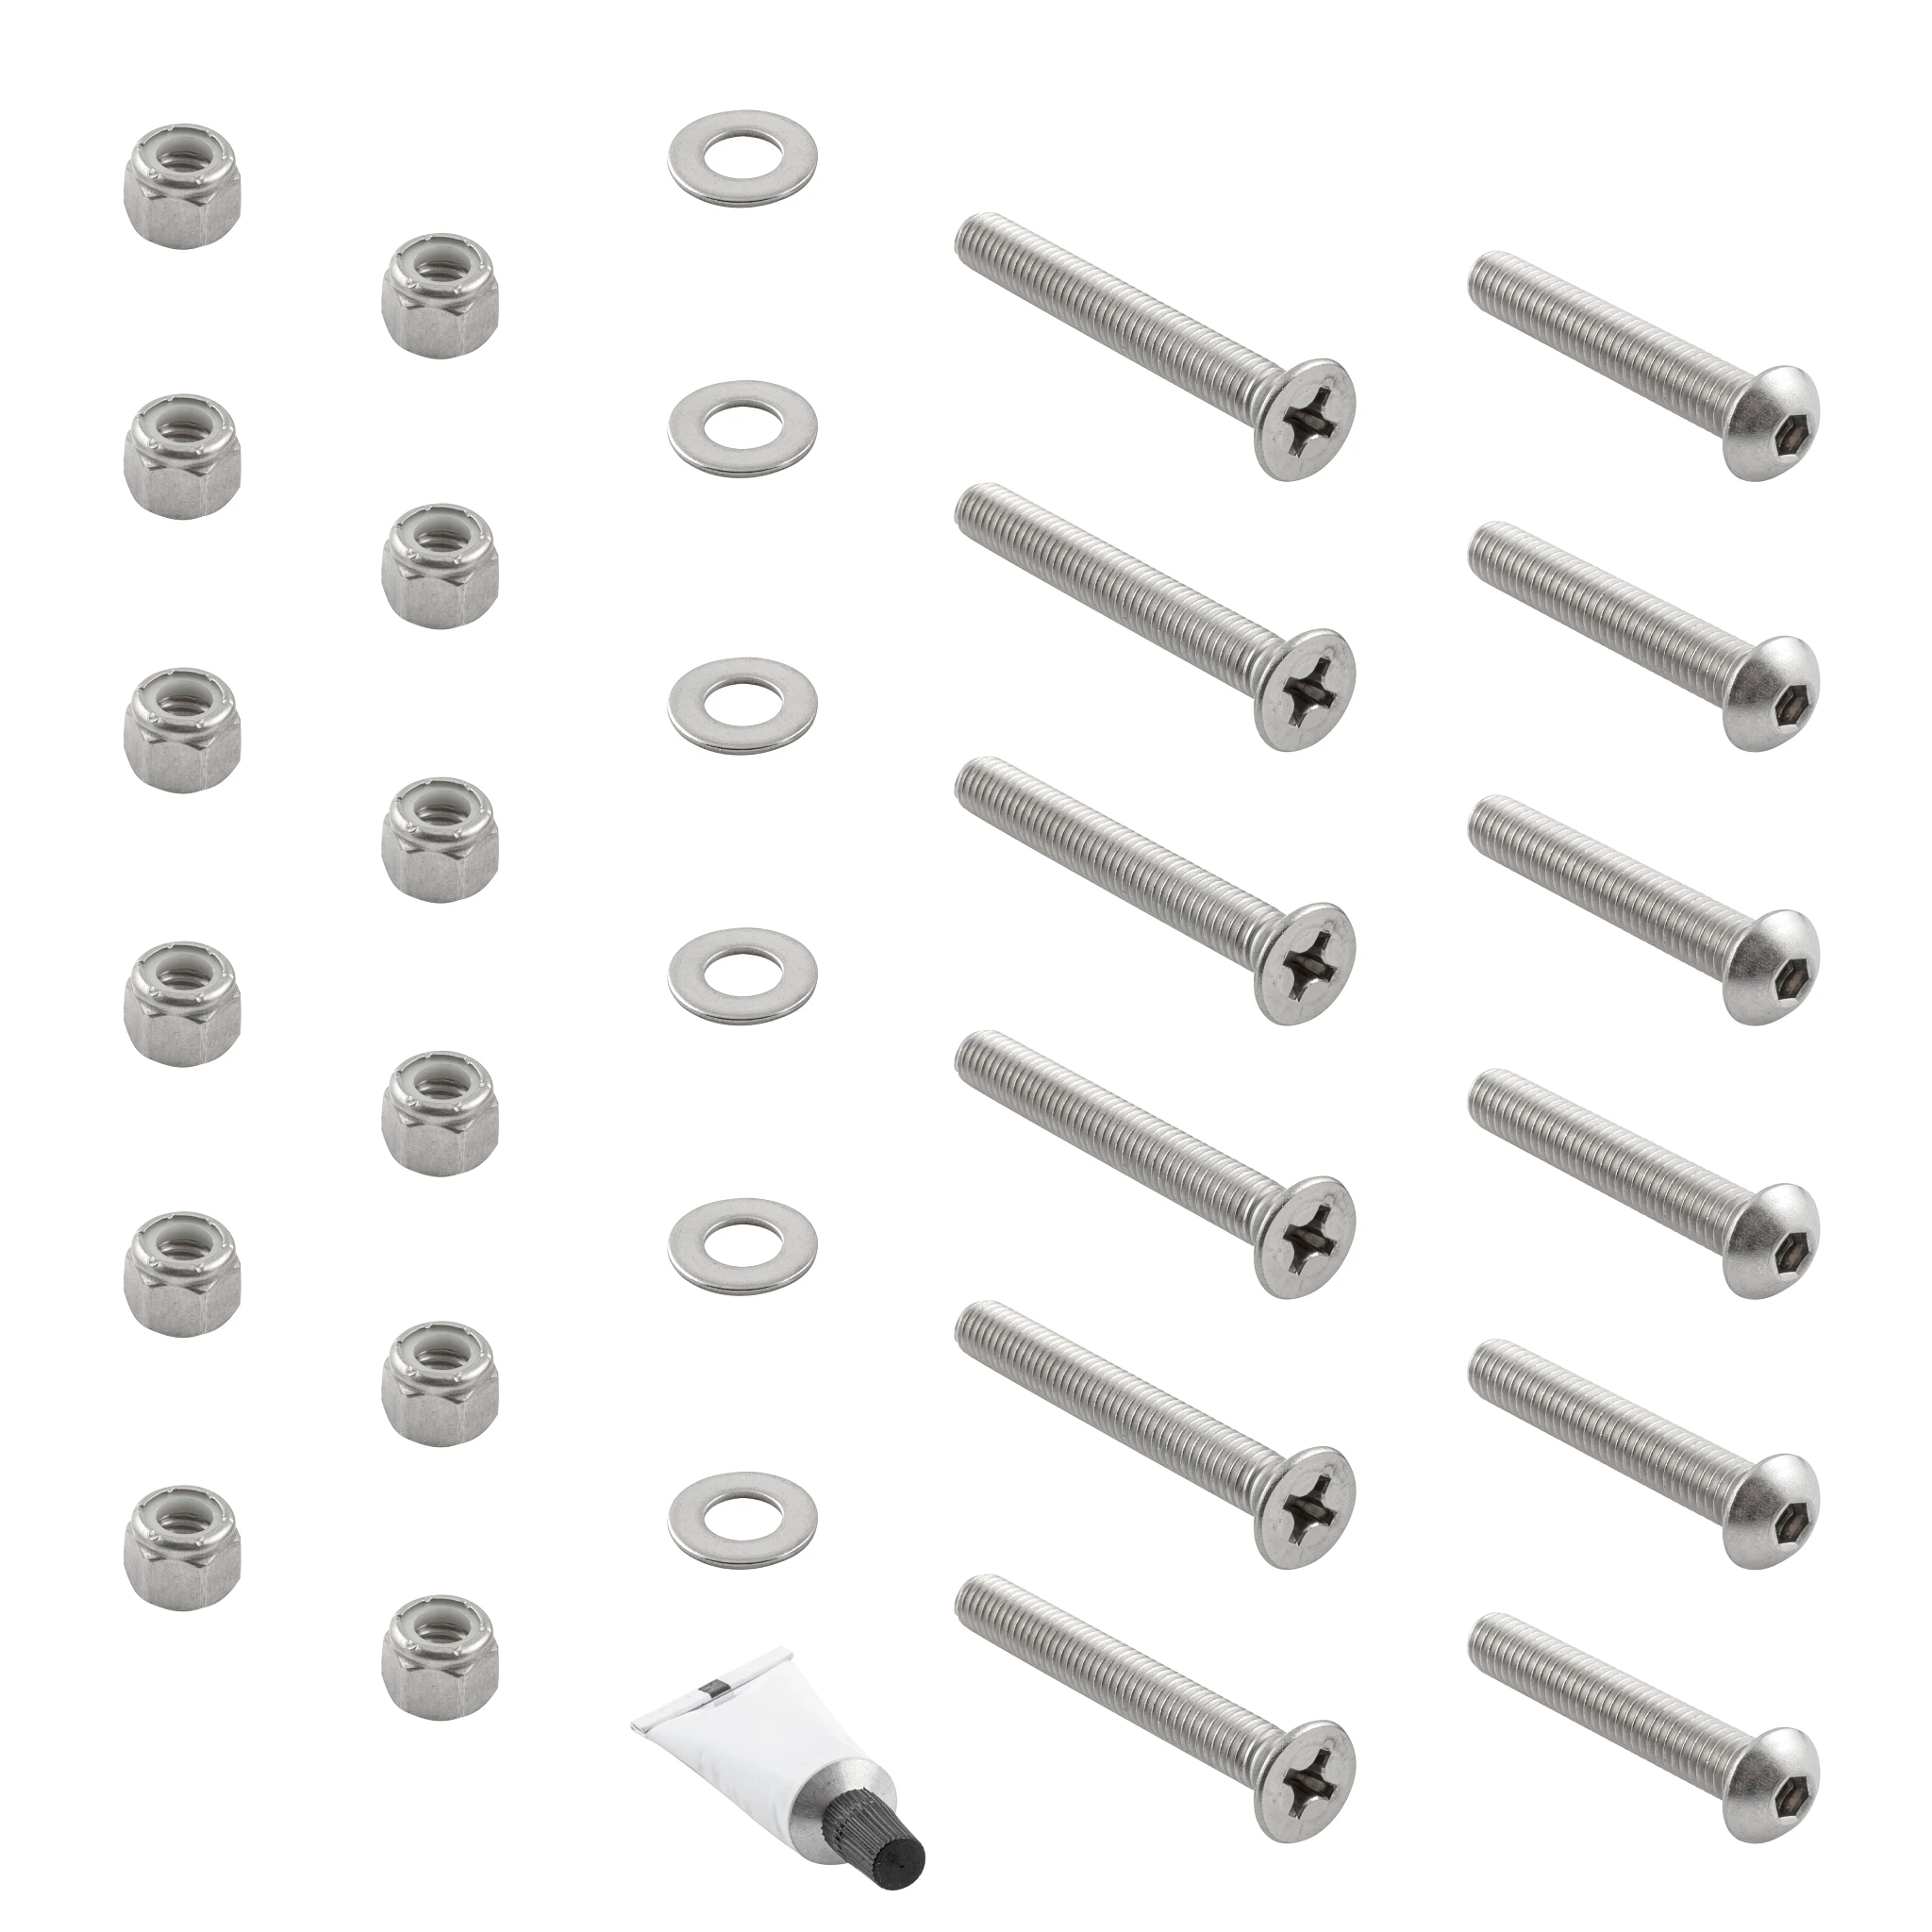 Assortment of hardware including nuts, bolts, and screws